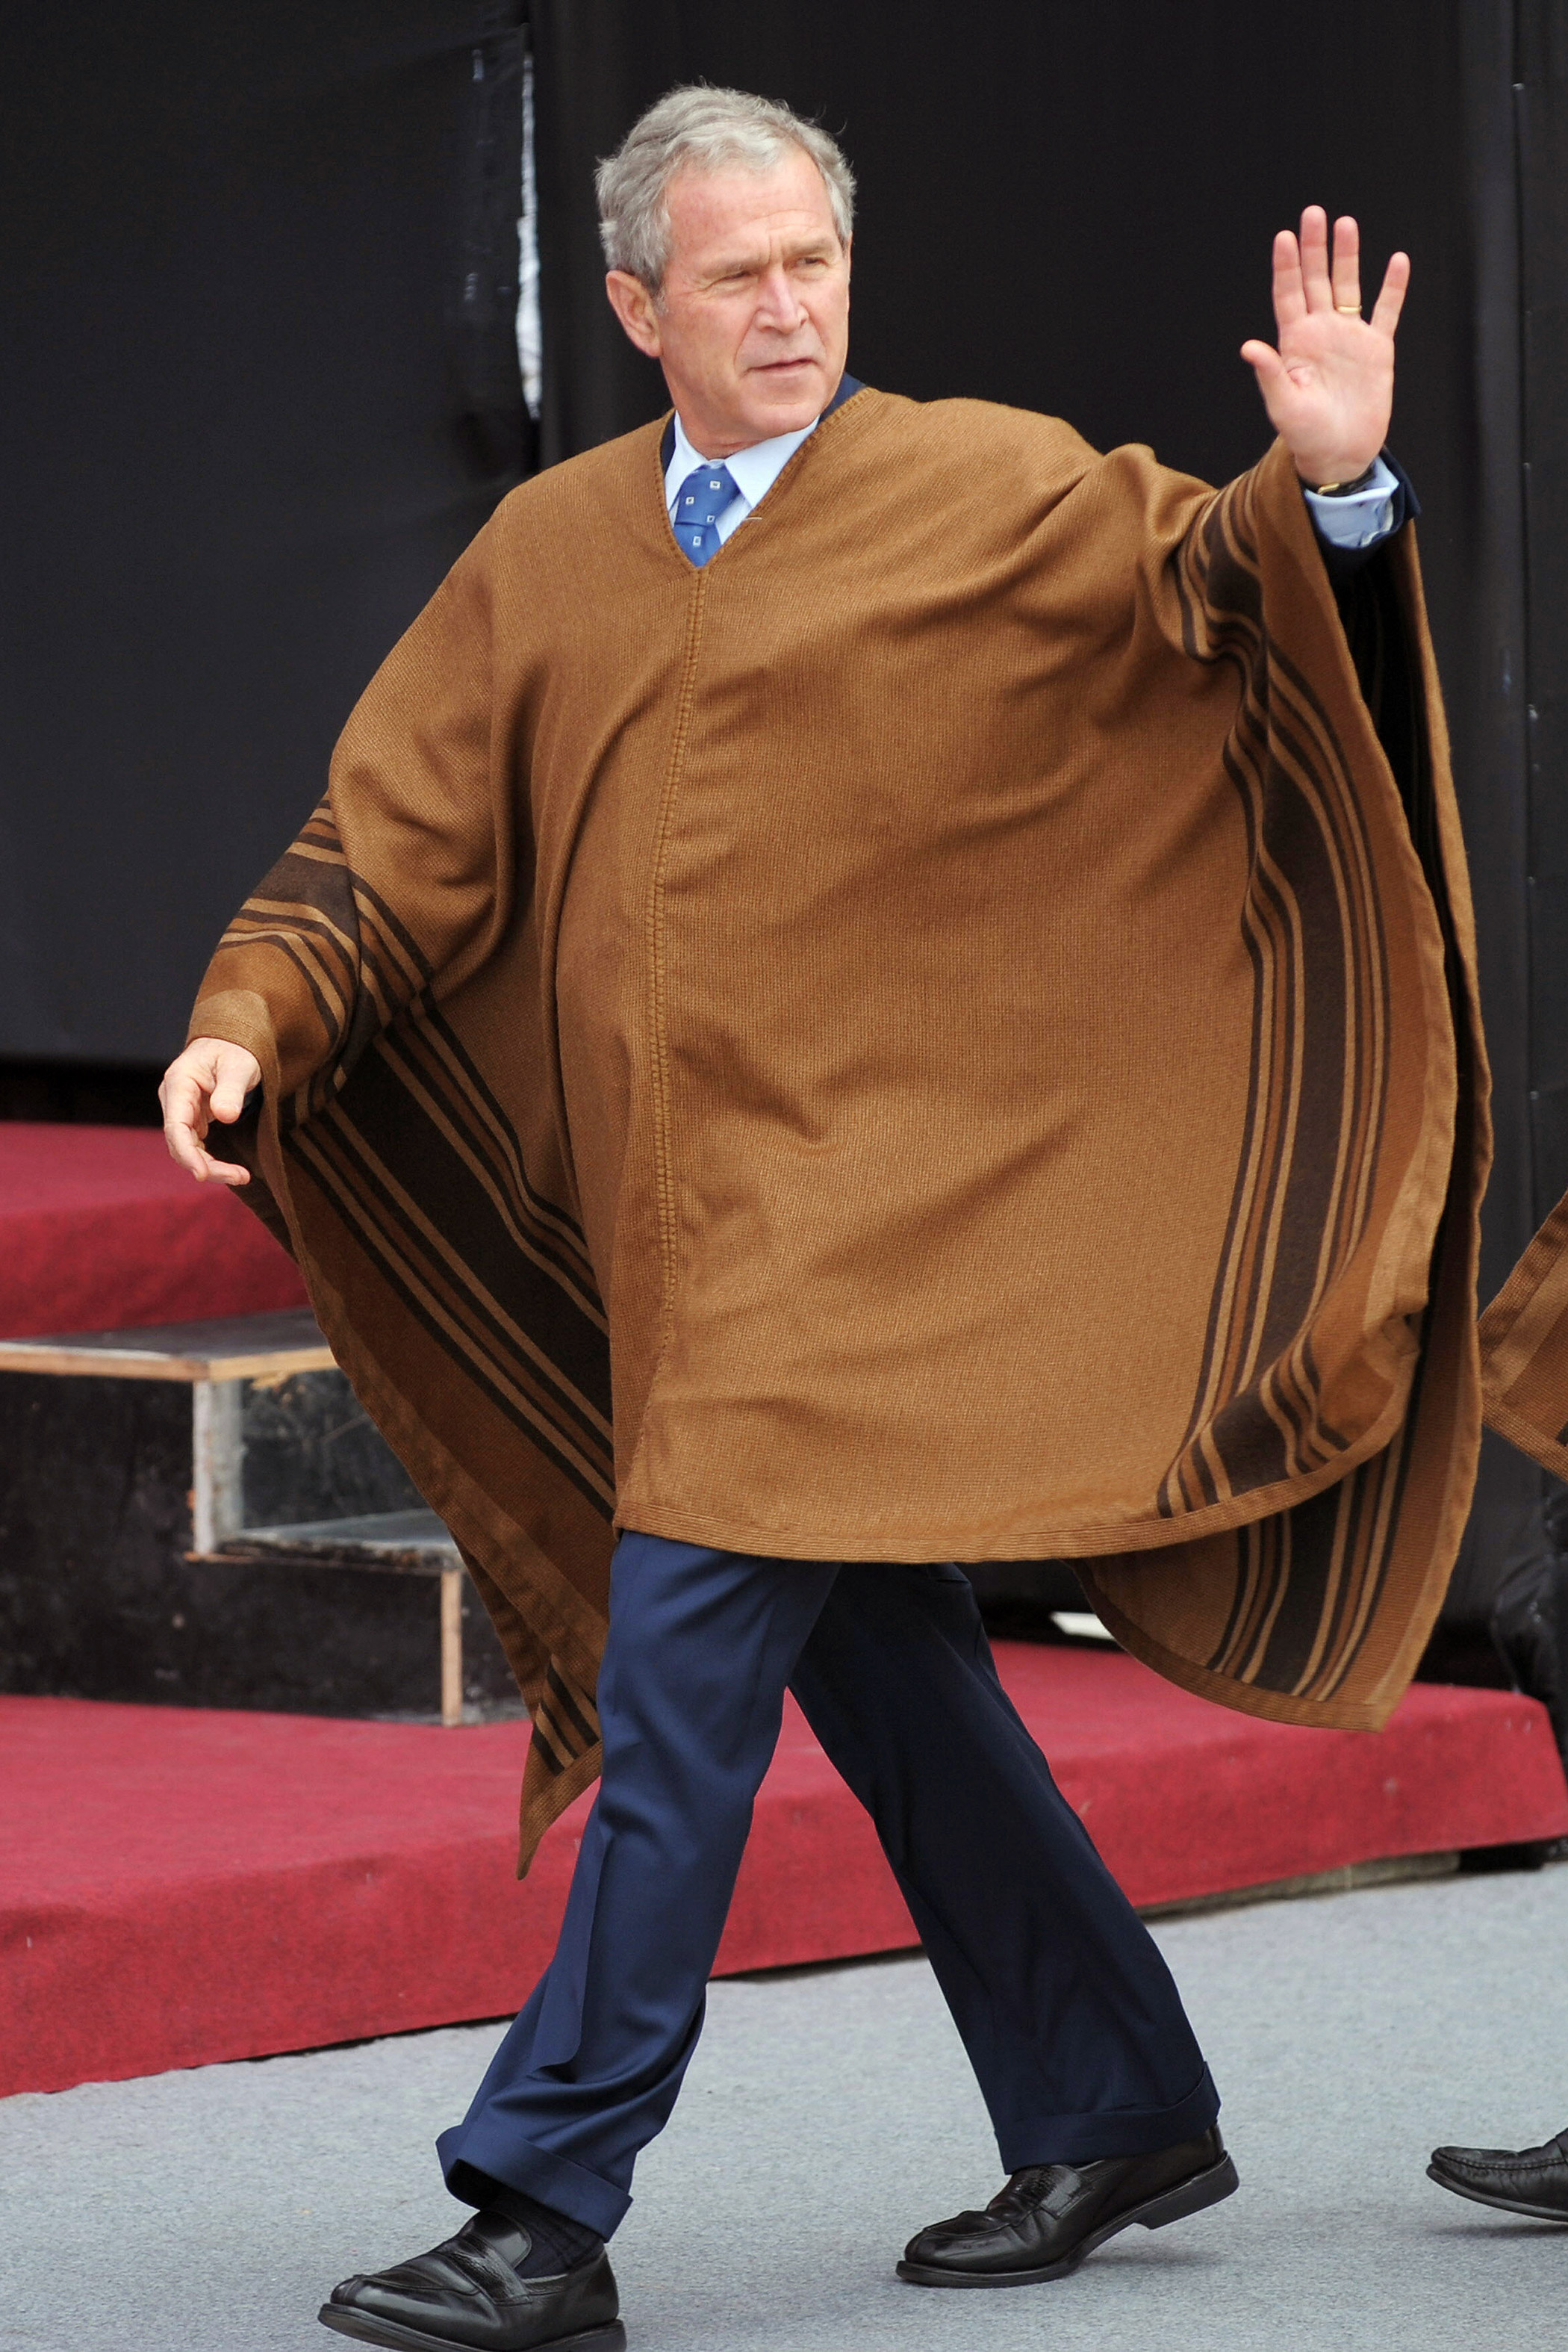 U.S. President George W. Bush, wearing a poncho, arrives for the official photograph for the APEC Summit on Nov. 23, 2008 in Lima, Peru.